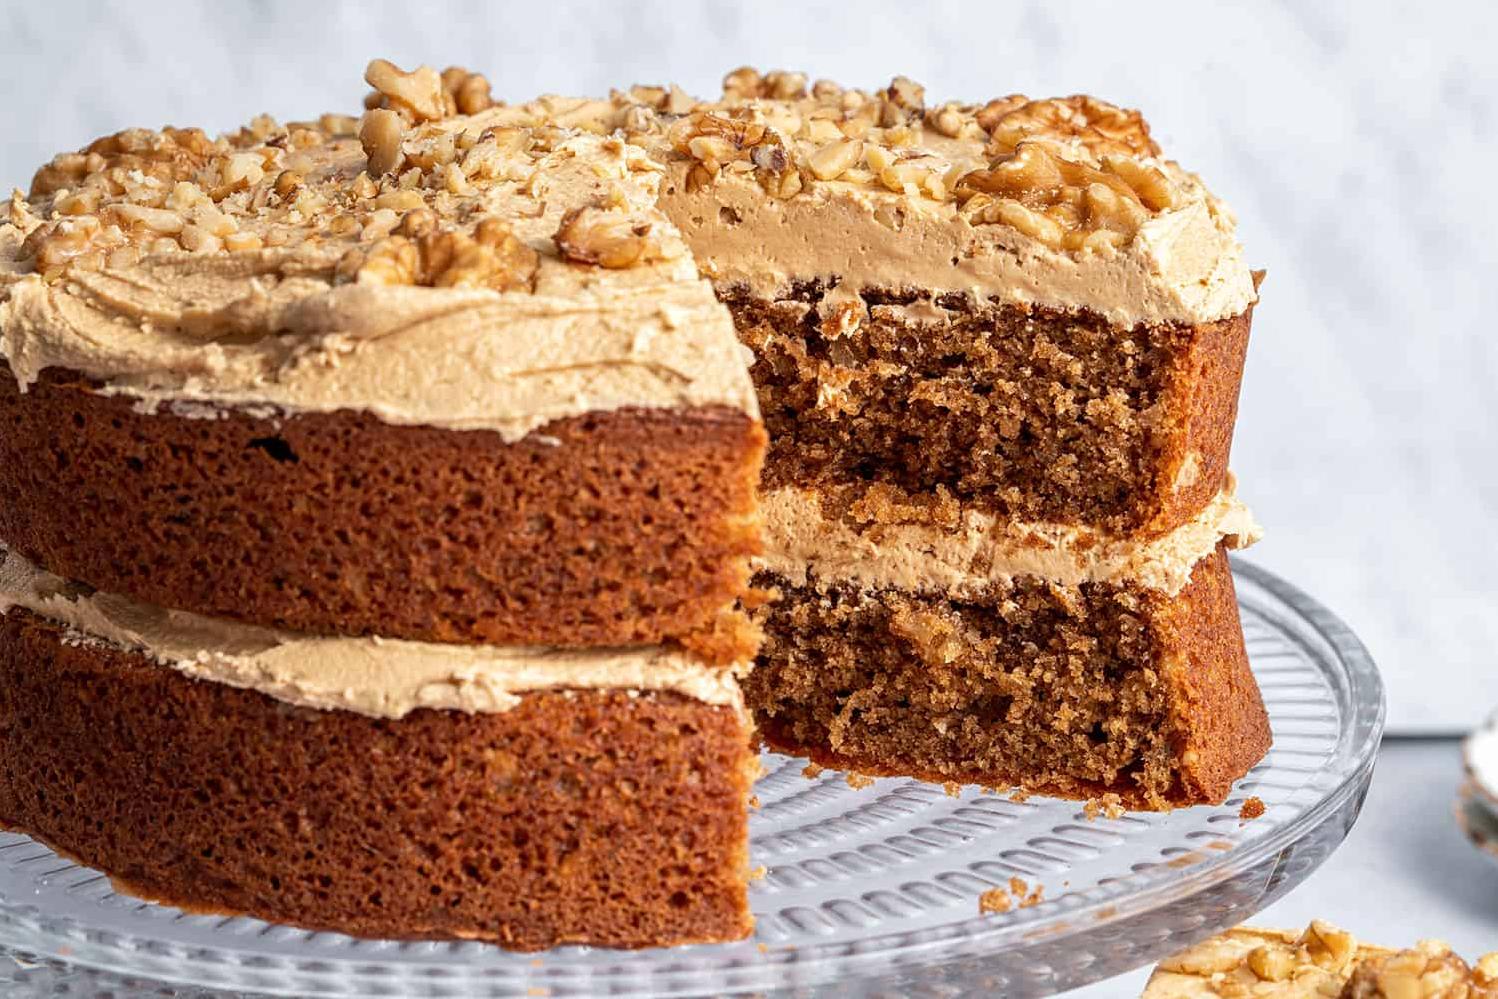  Who says gluten-free can't be delicious? This moist and nutty walnut cake is a true delight!